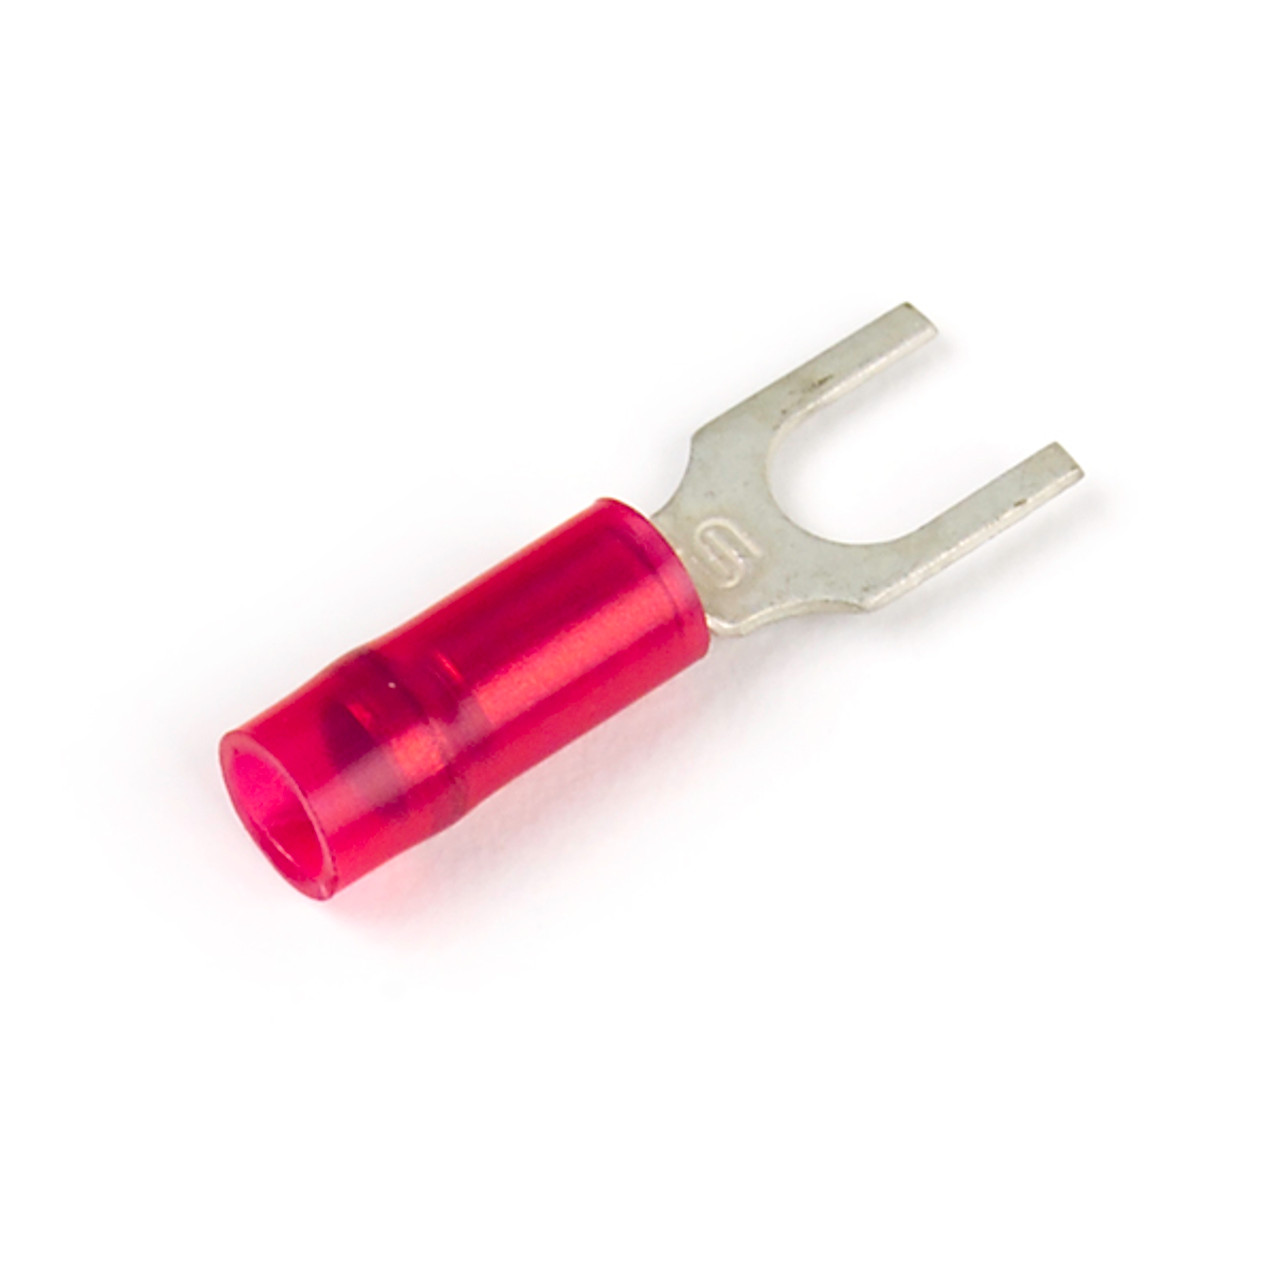 22 - 16 AWG Nylon Spade Terminals #4 - #6 @ 50 Pack - Red  83-2217